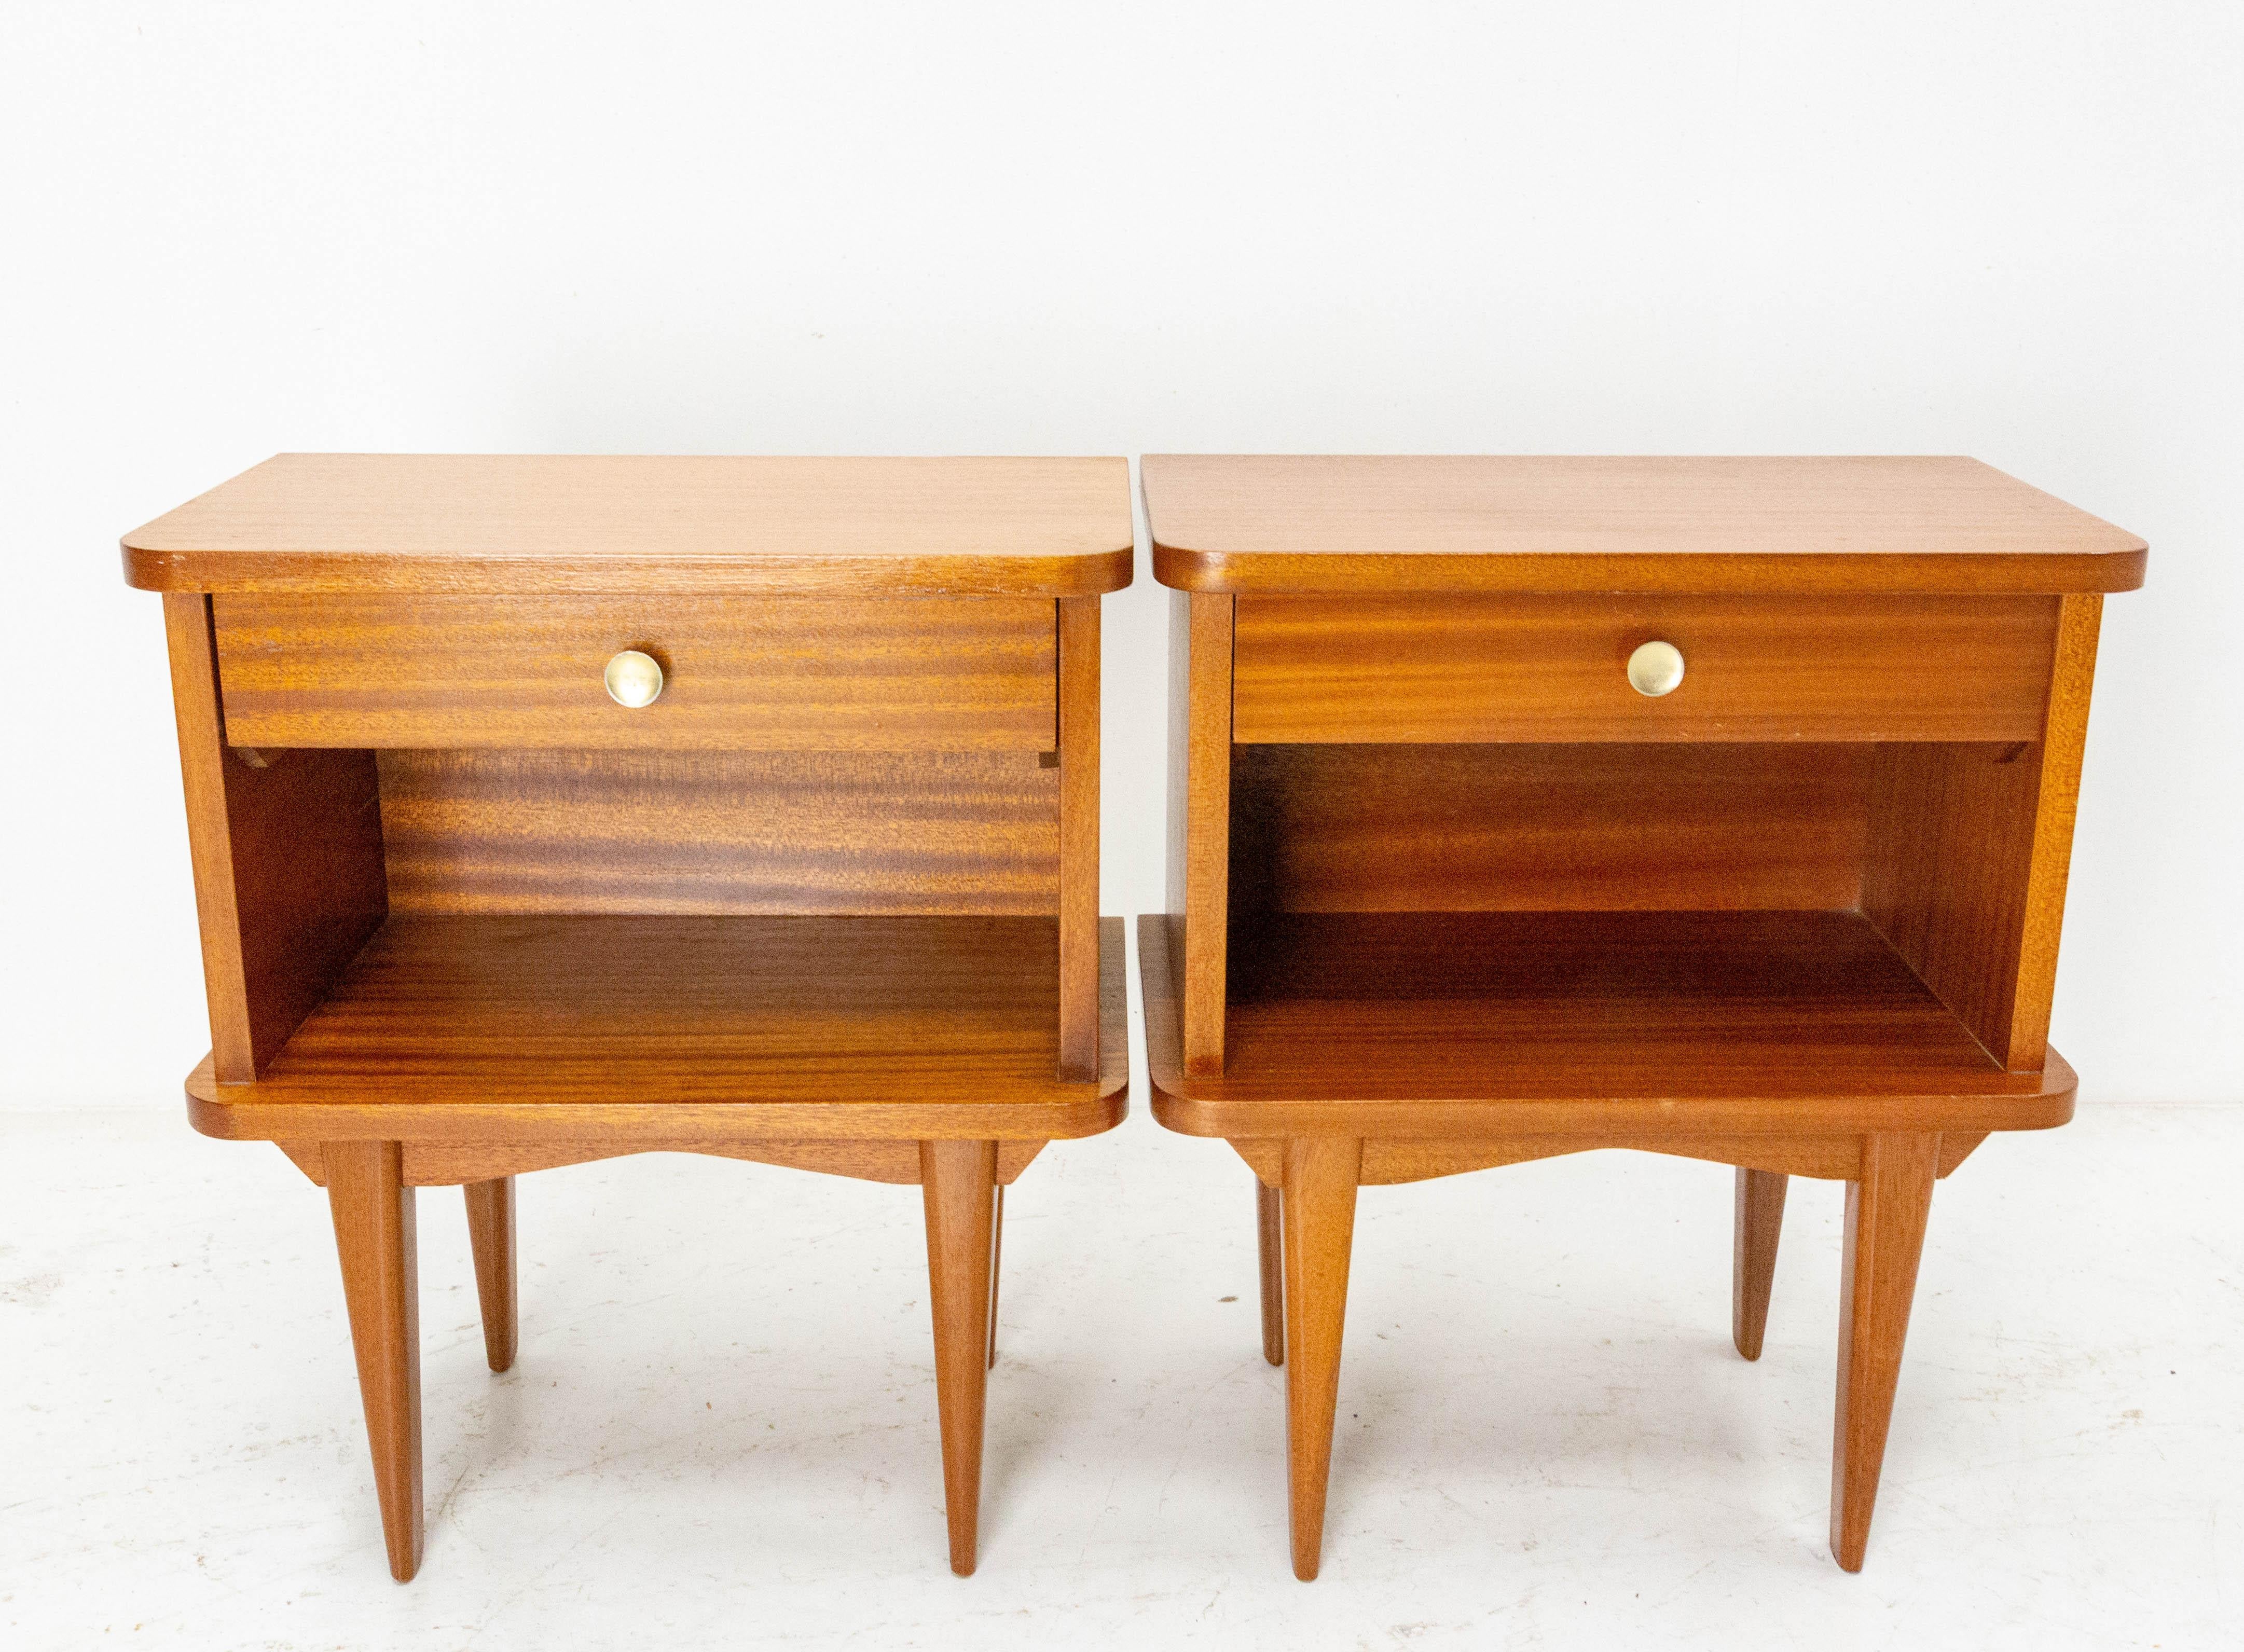 French side cabinets nightstand wood bedside tables
Midcentury 1960
One top of the cabinets is lighter than the other.

Shipping: 
1 pack: P 58/L 46/H 56.5 cm 15.2 kg.